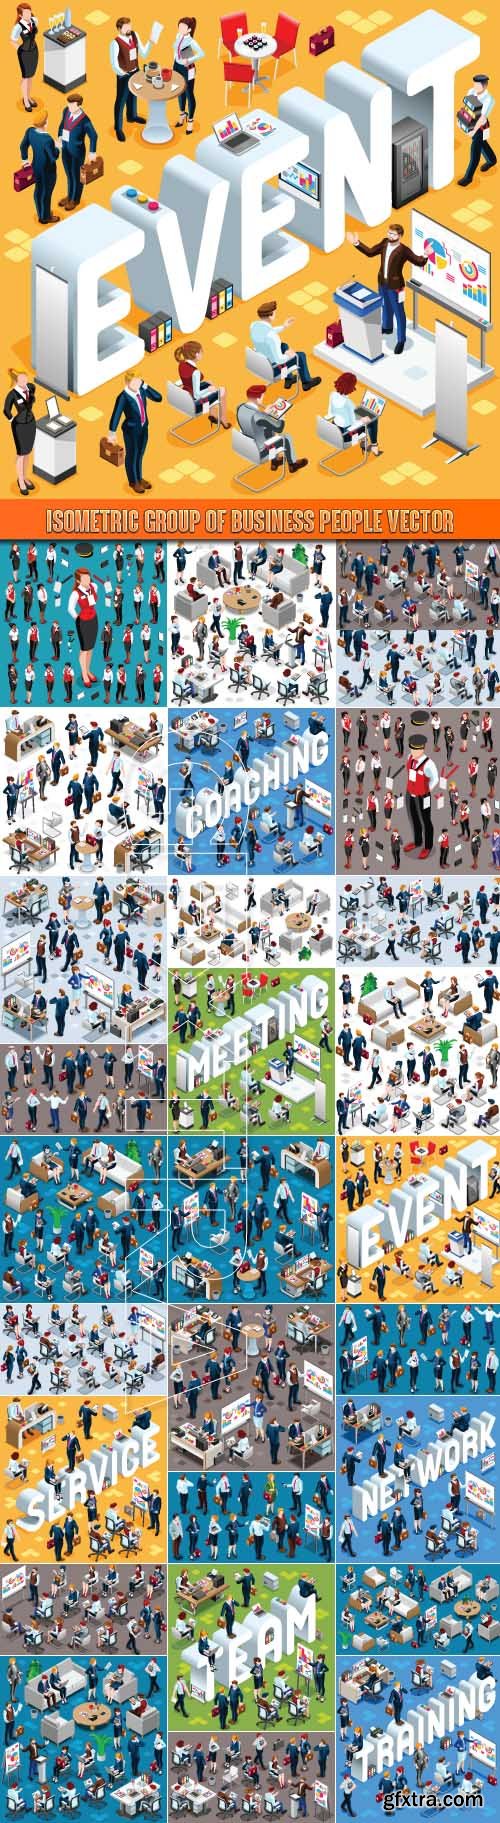 Isometric group of business people vector